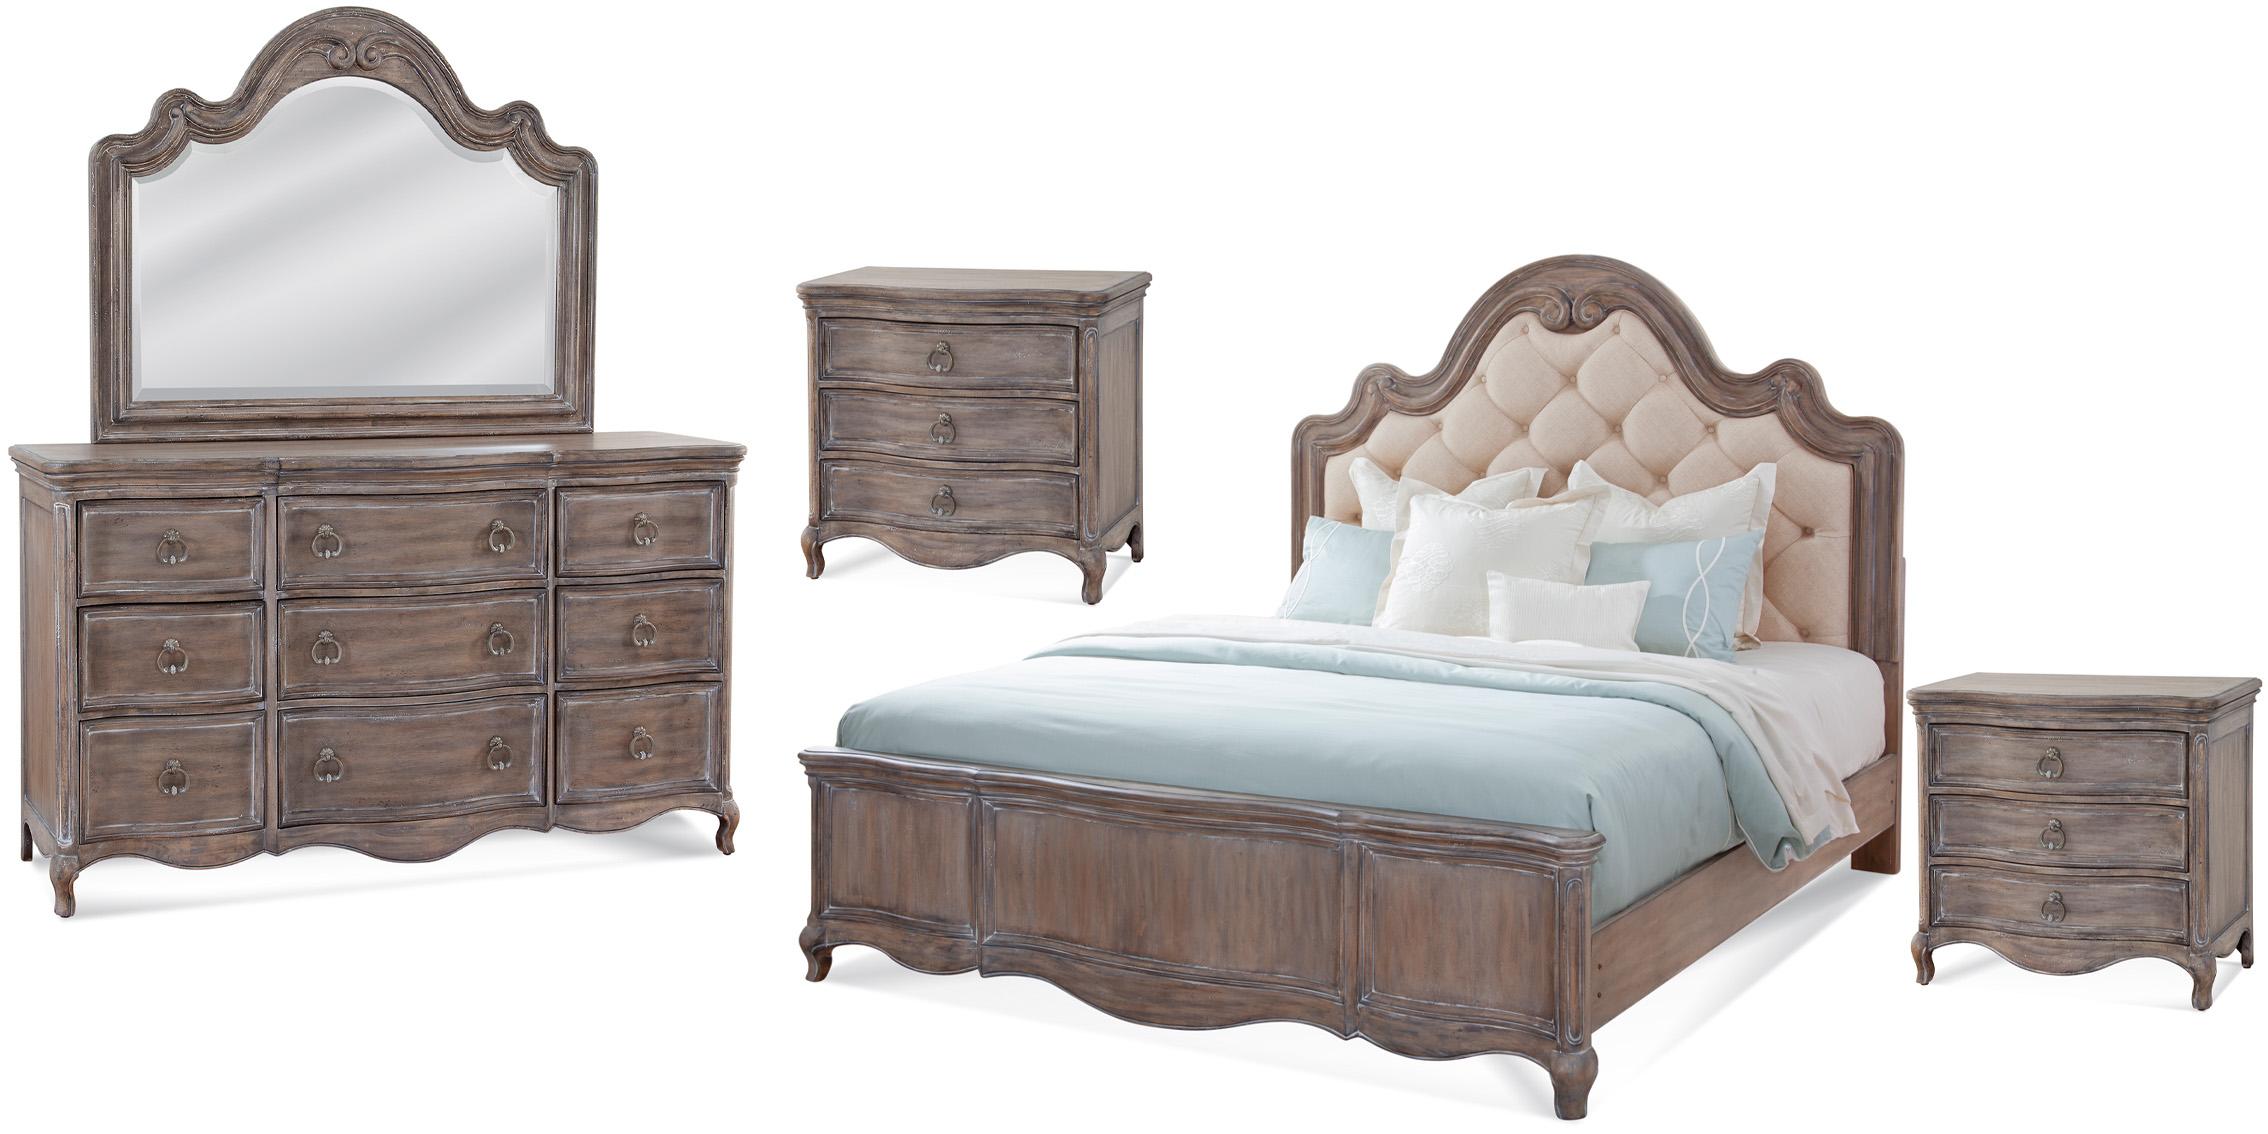 Classic, Traditional Panel Bedroom Set GENOA 1575-50TUPH-Set 1575-50TUPH-2NDM-5PC in Antique, Gray Fabric